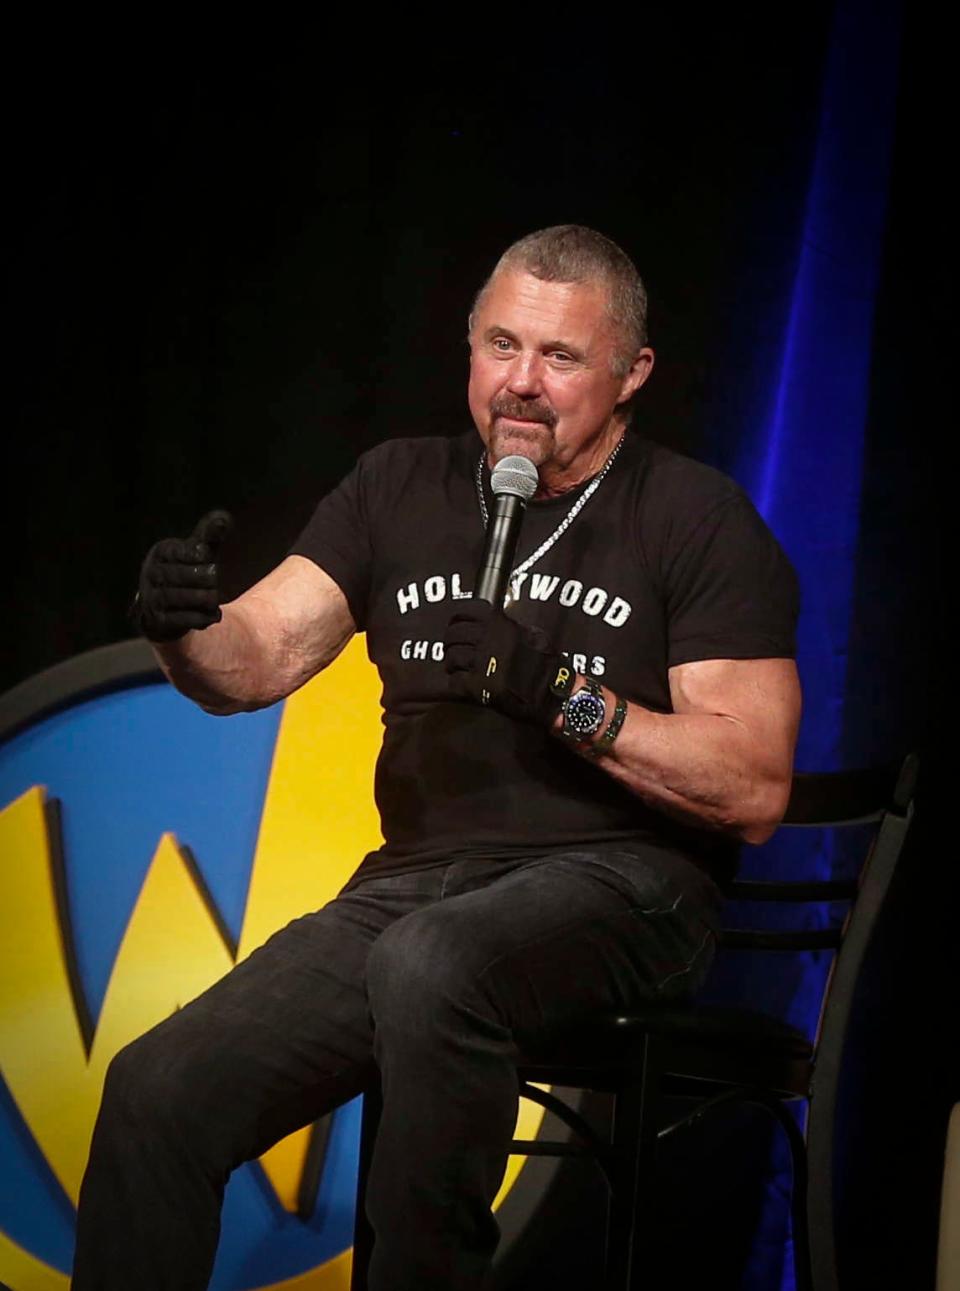 Kane Hodder is an actor and stuntman from Auburn, California, famous for portraying Jason Voorhees in the "Friday the 13th" franchise.